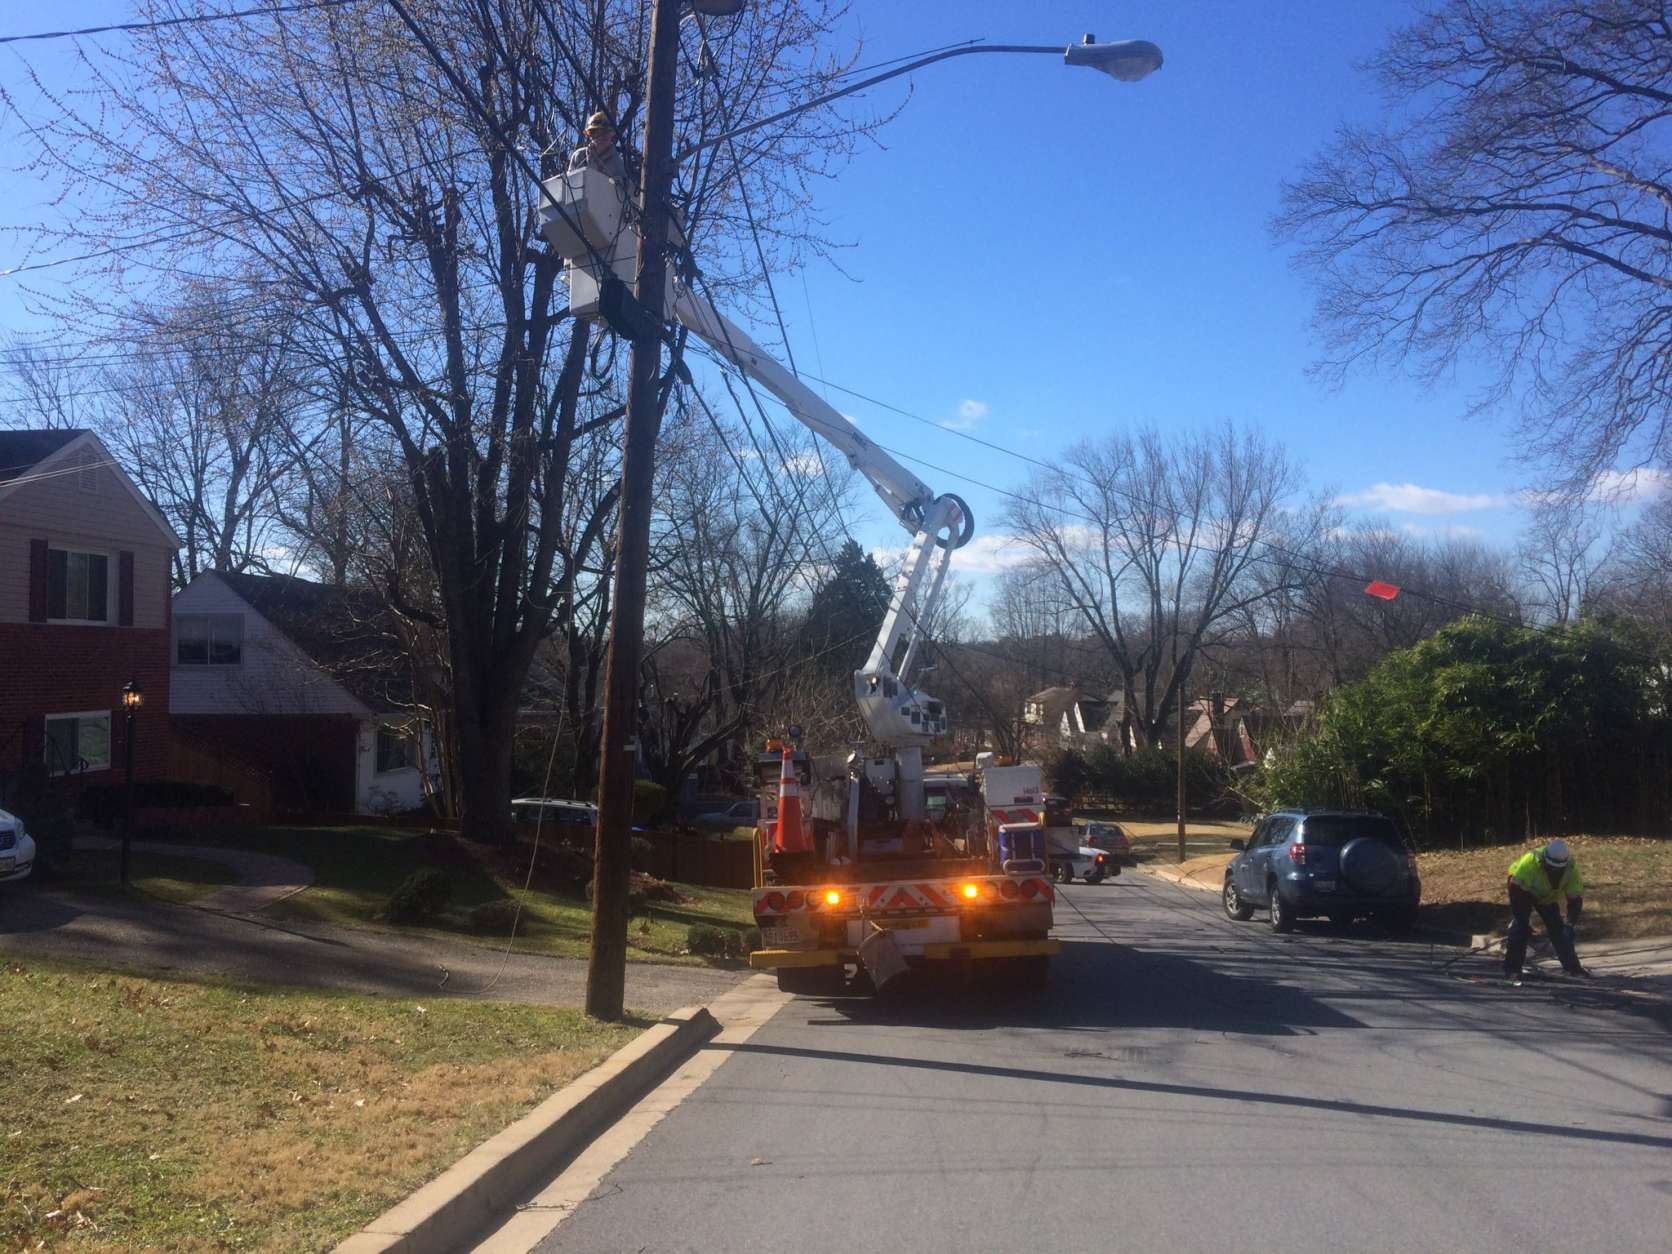 Wires were down and the road was closed between Lanark Way and Stirling Road in Silver Spring, Maryland. (Courtesy Pete Piringer)